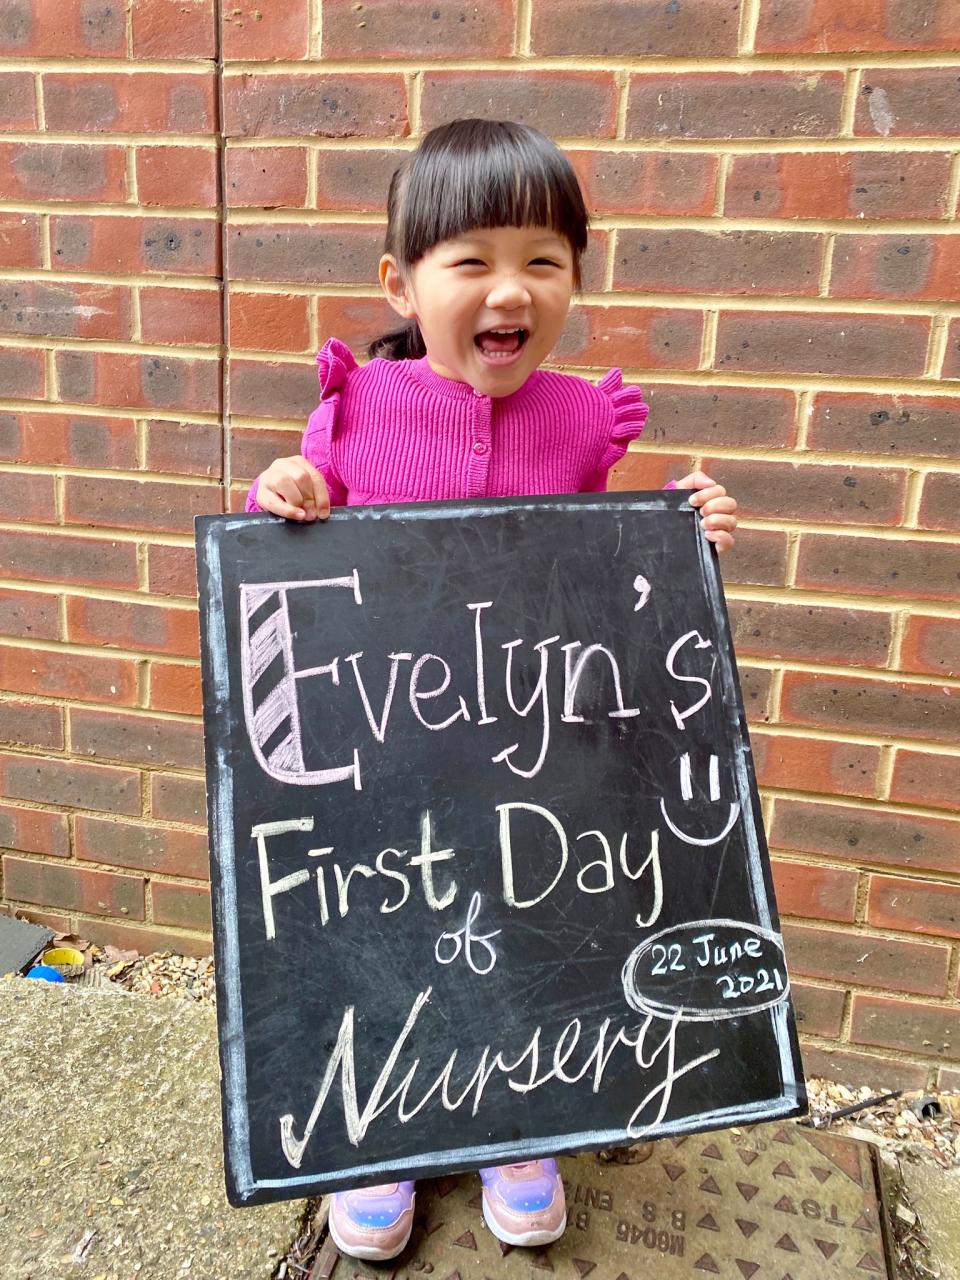 Since the age of 3 in the UK, there is free tuition in pre-school, and I am very happy on the first day of school.